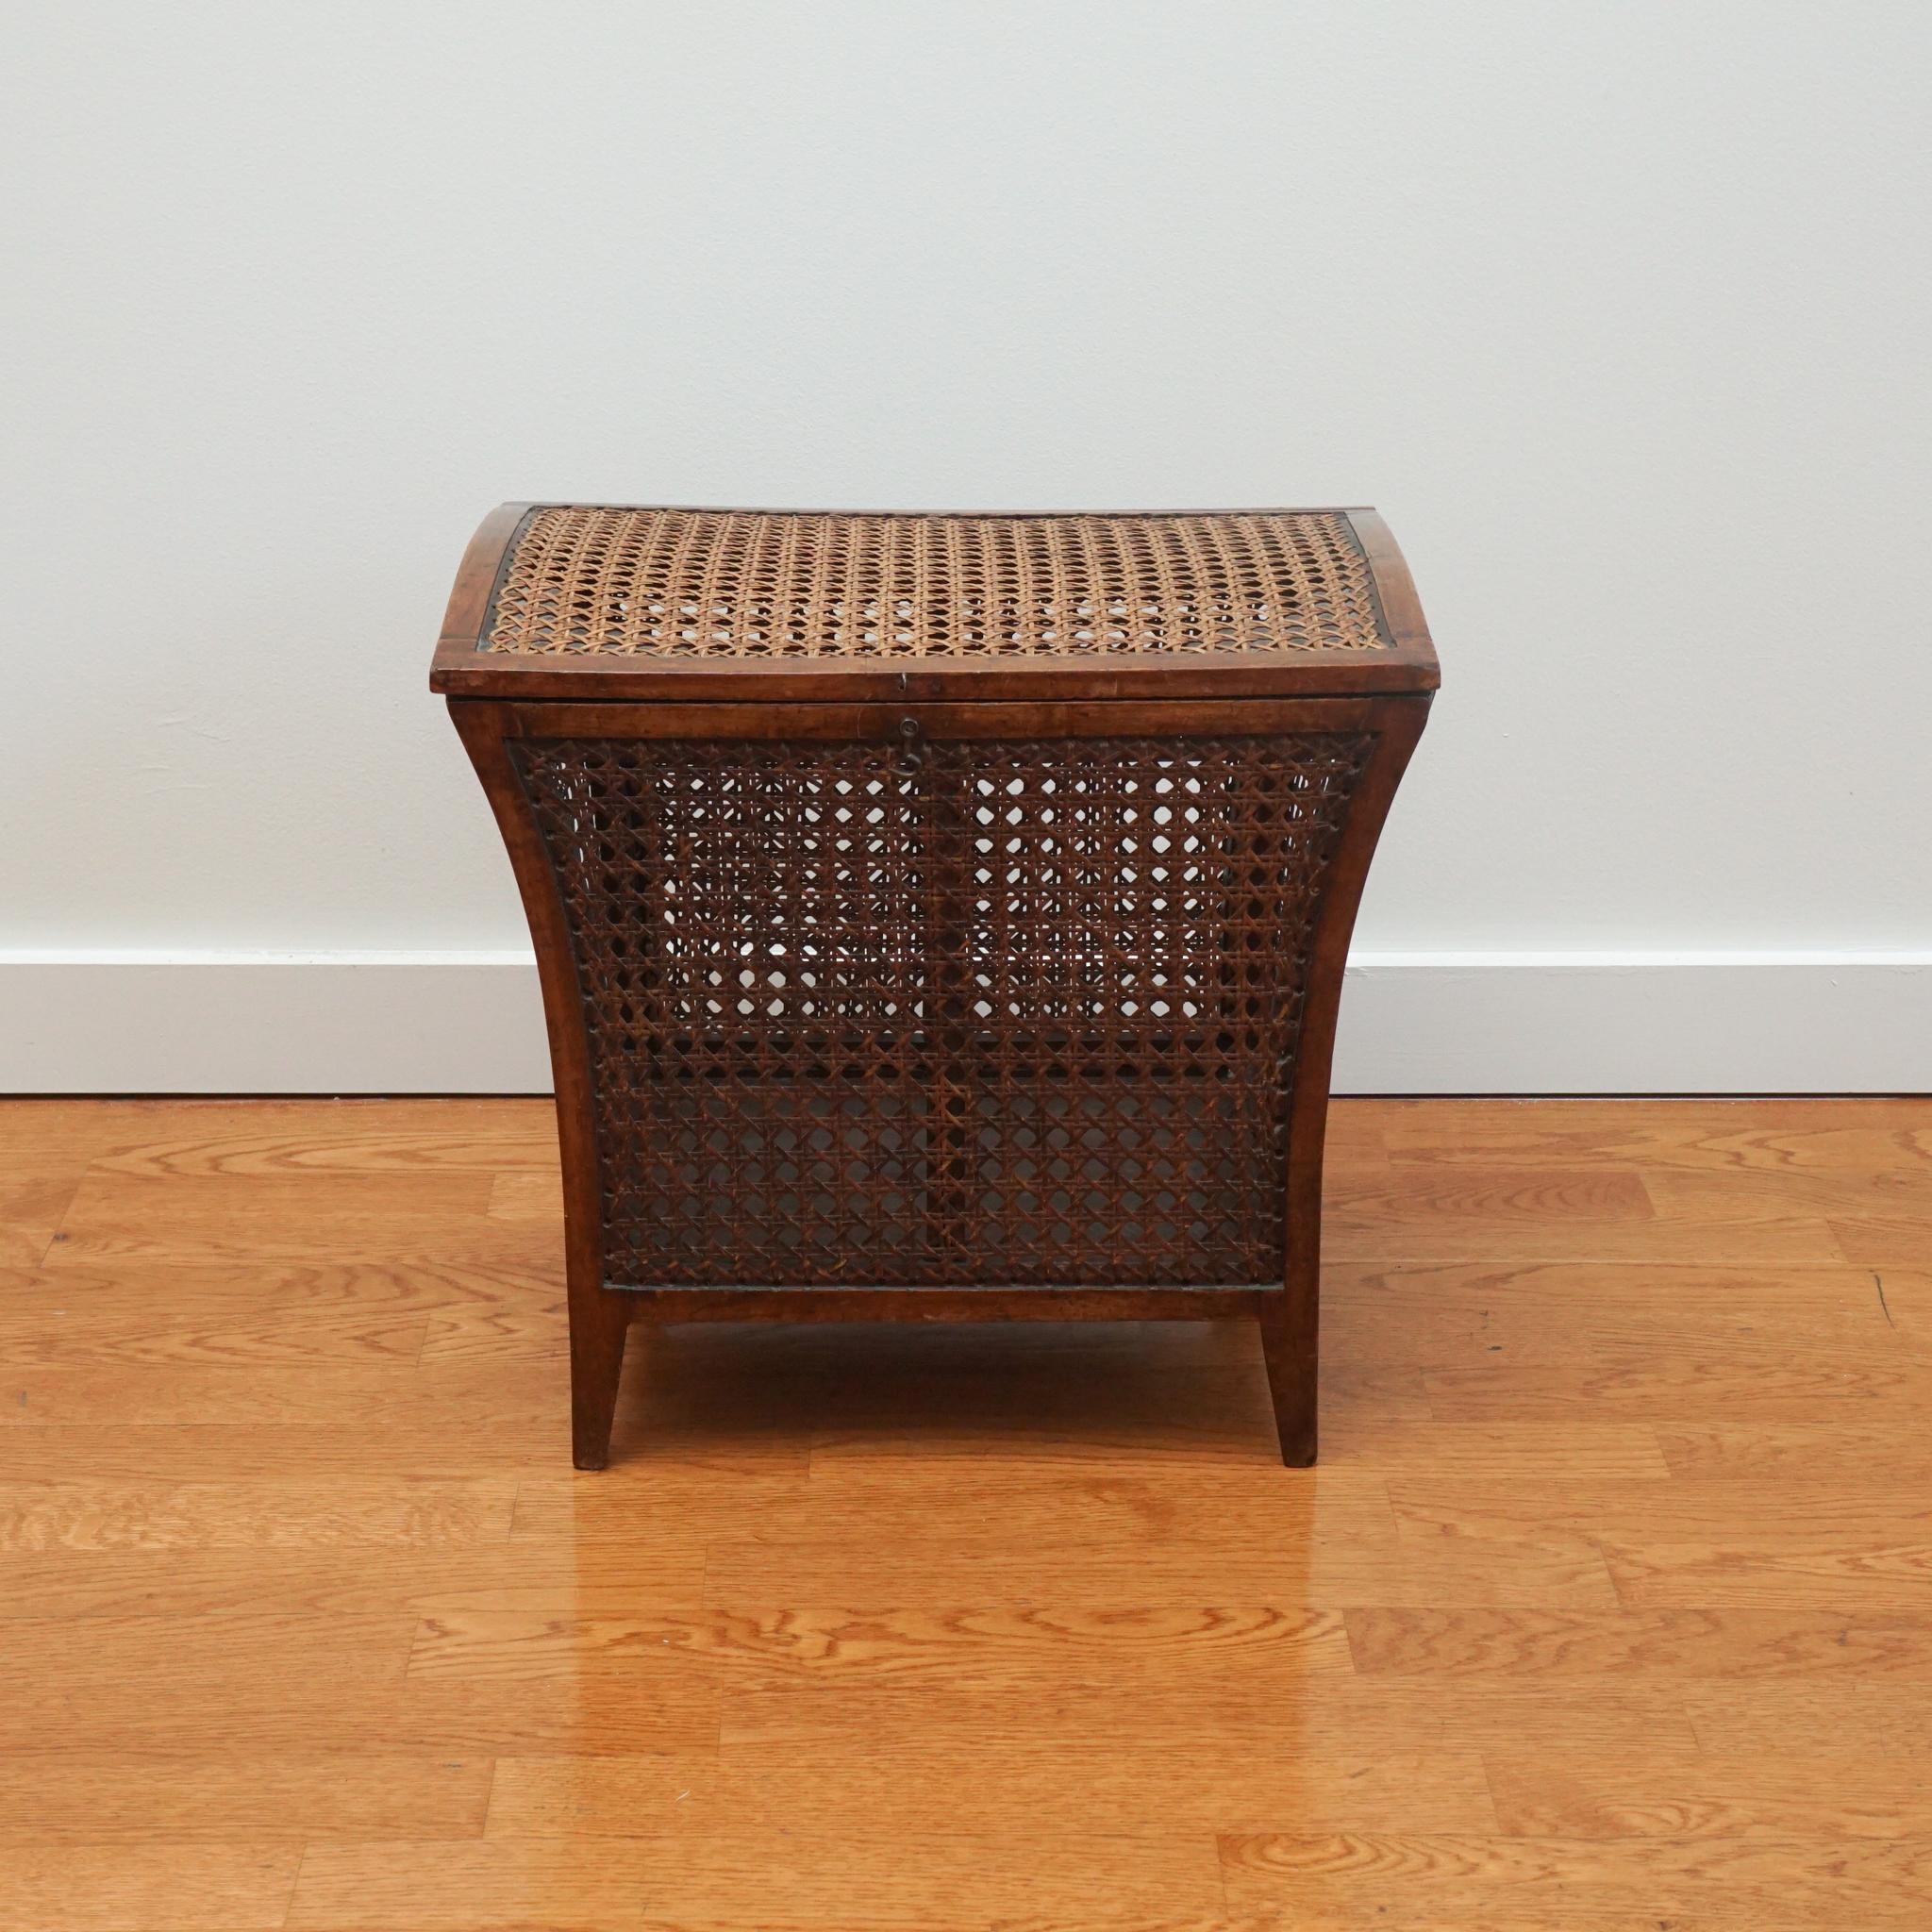 Designed for practical use, this antique wood and cane hamper is as functional today as it was when first made. The hamper is in very good condition given its age (1890s) and the original caning, stitching and hinges are intact. Whether you consider